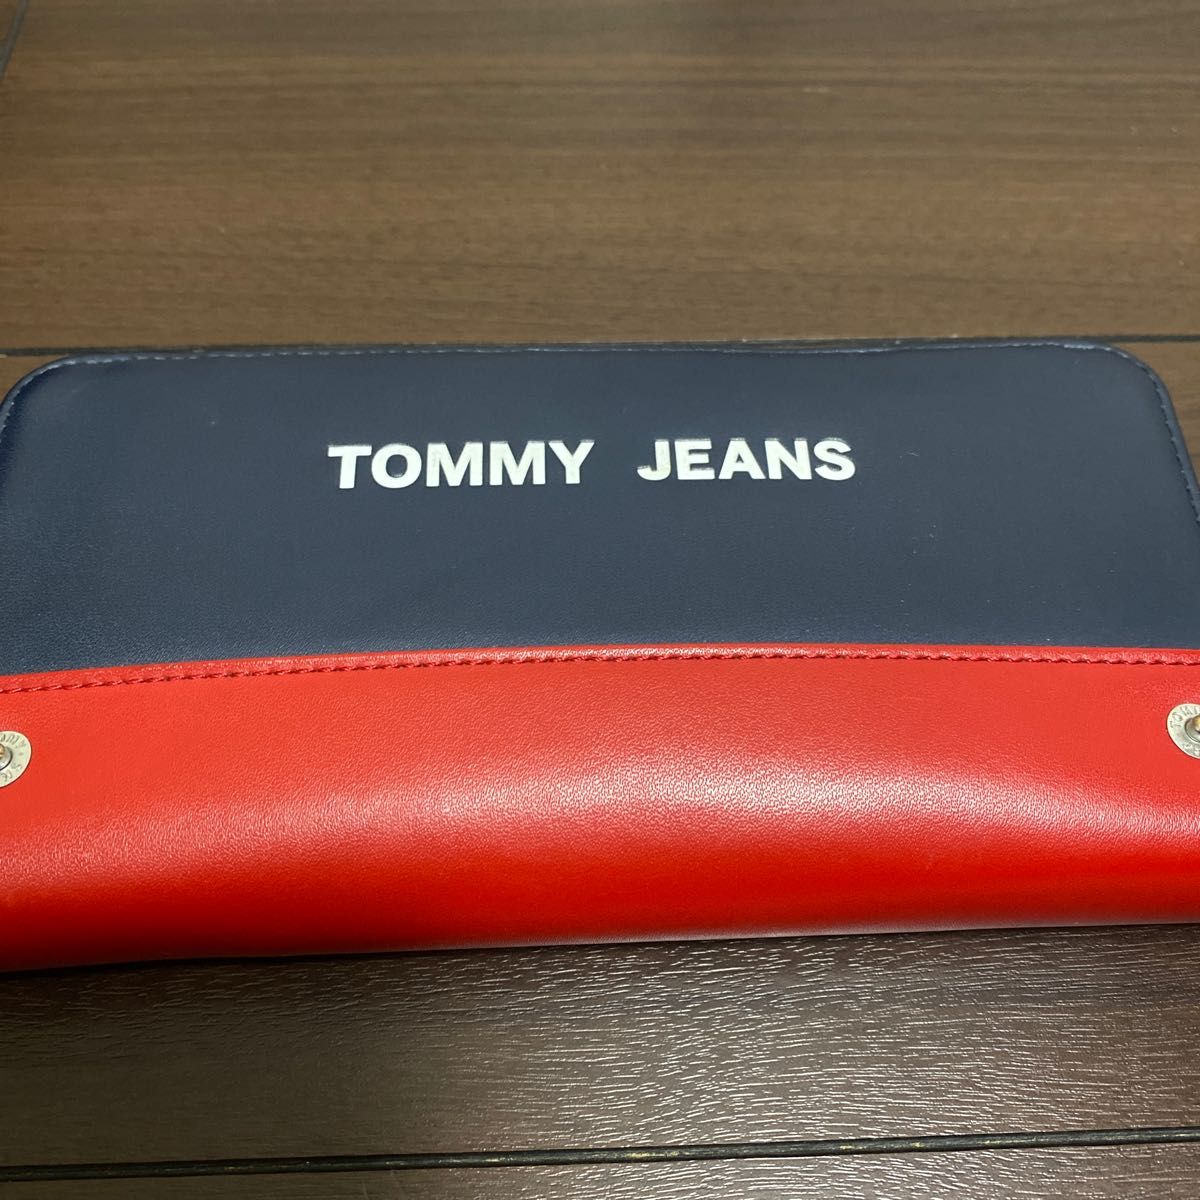 TOMMY JEANS 財布 